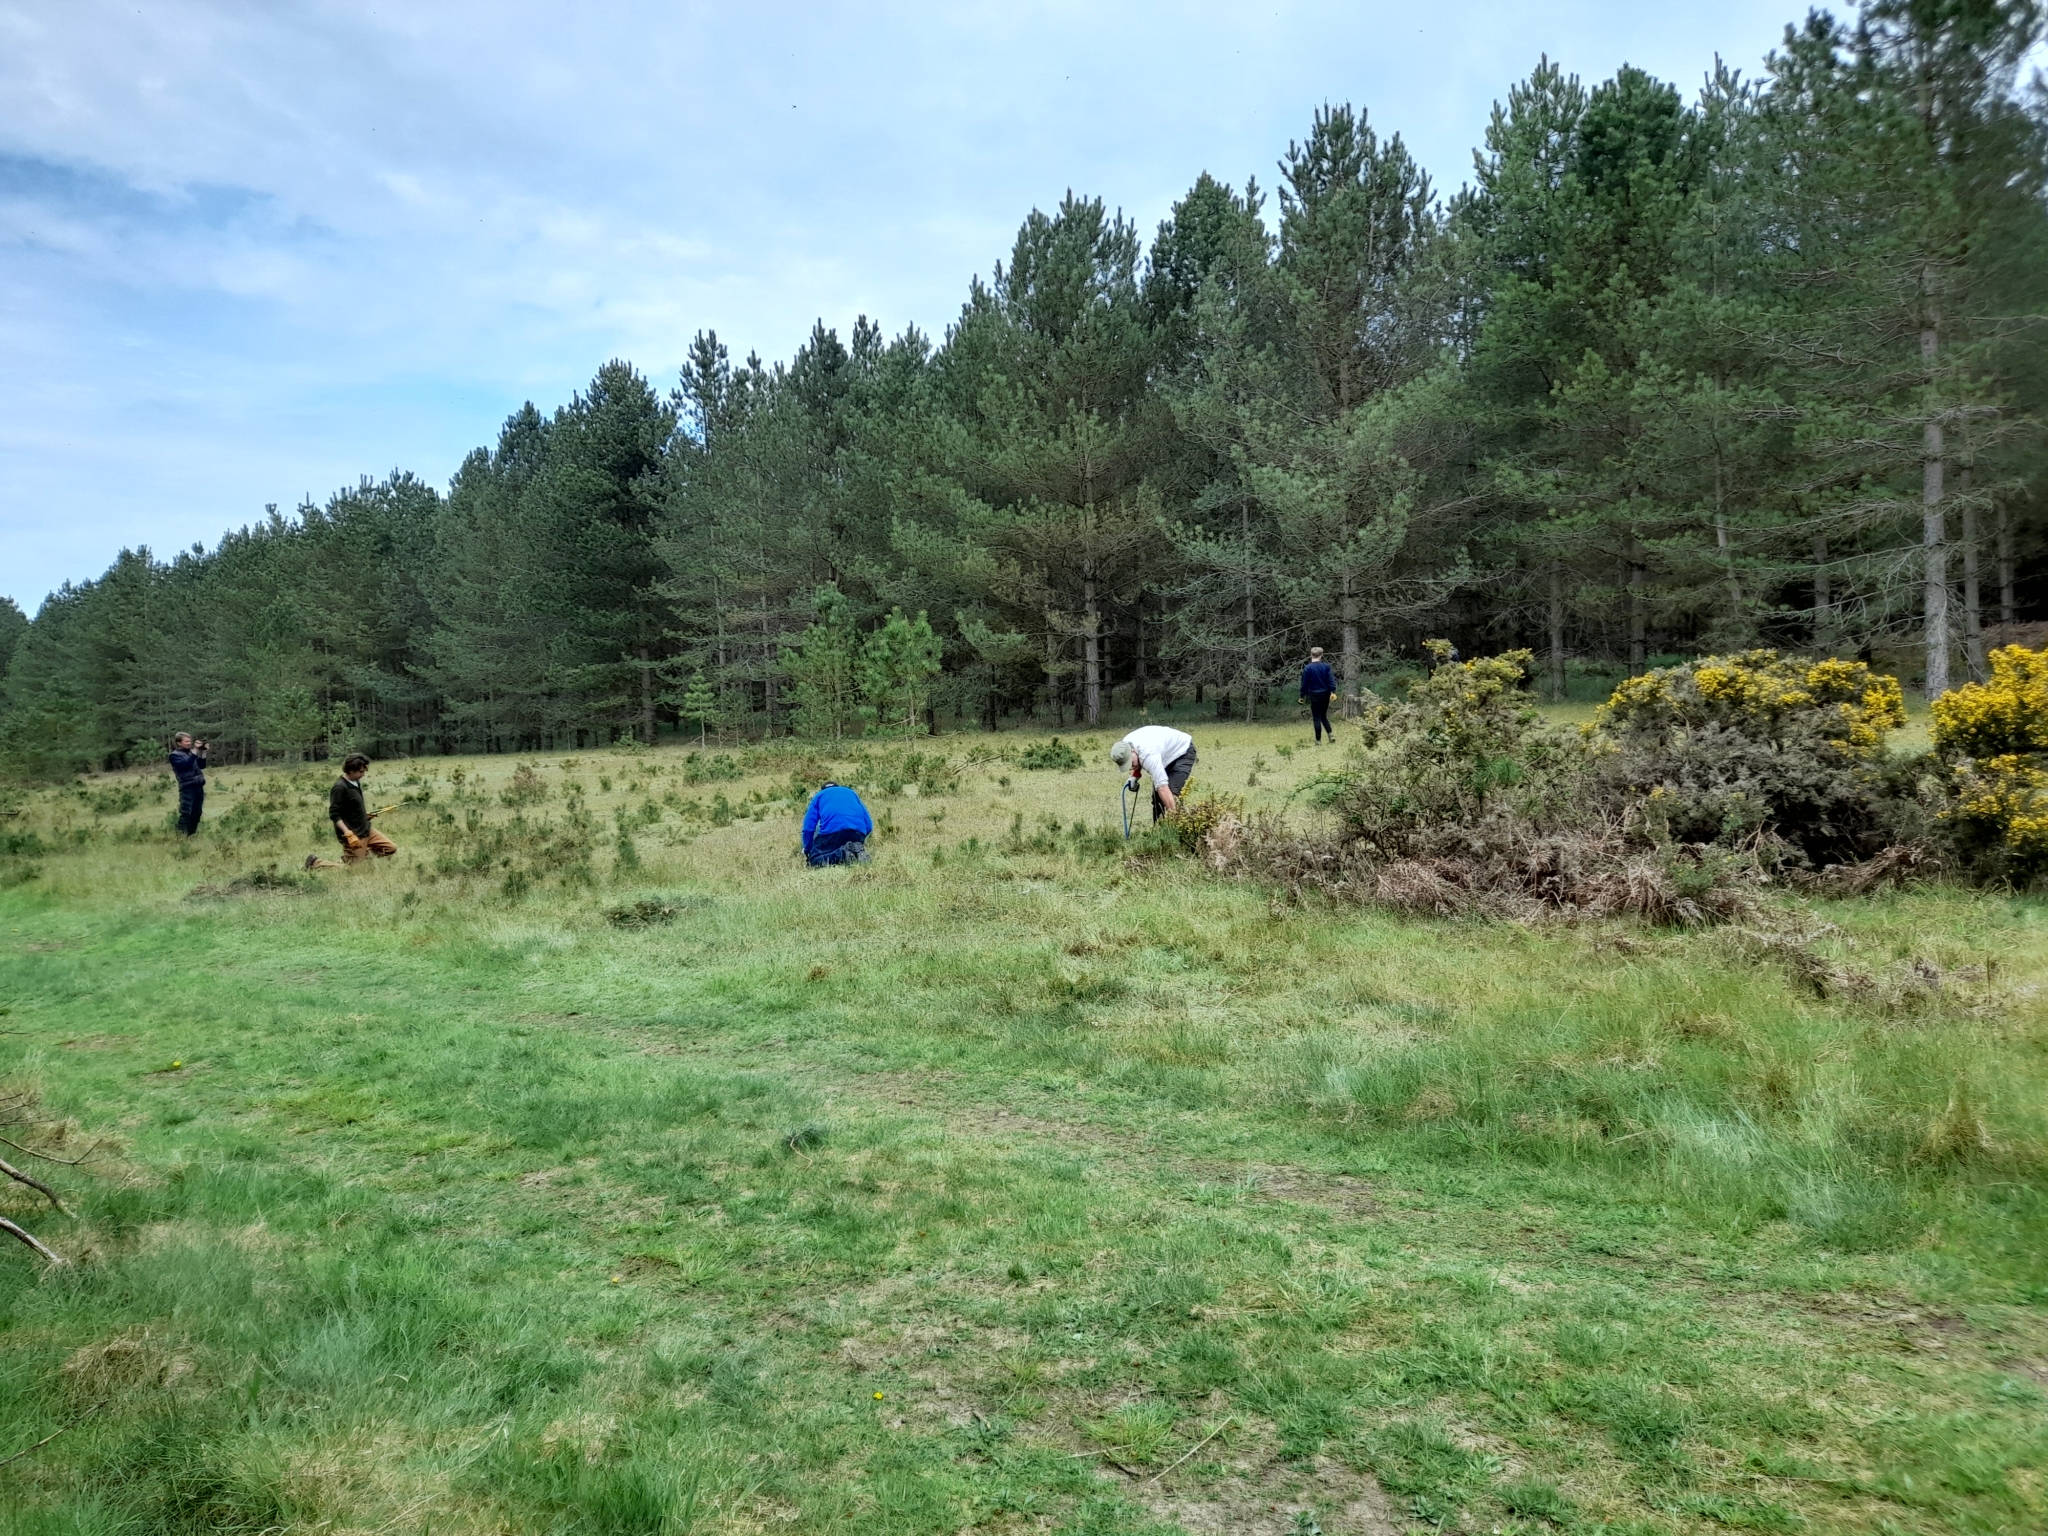 A photo from the FoTF Conservation Event - May 2022 - Self Sown Fir Removal at Kings Forest : Volunteers work to remove self sown Firs